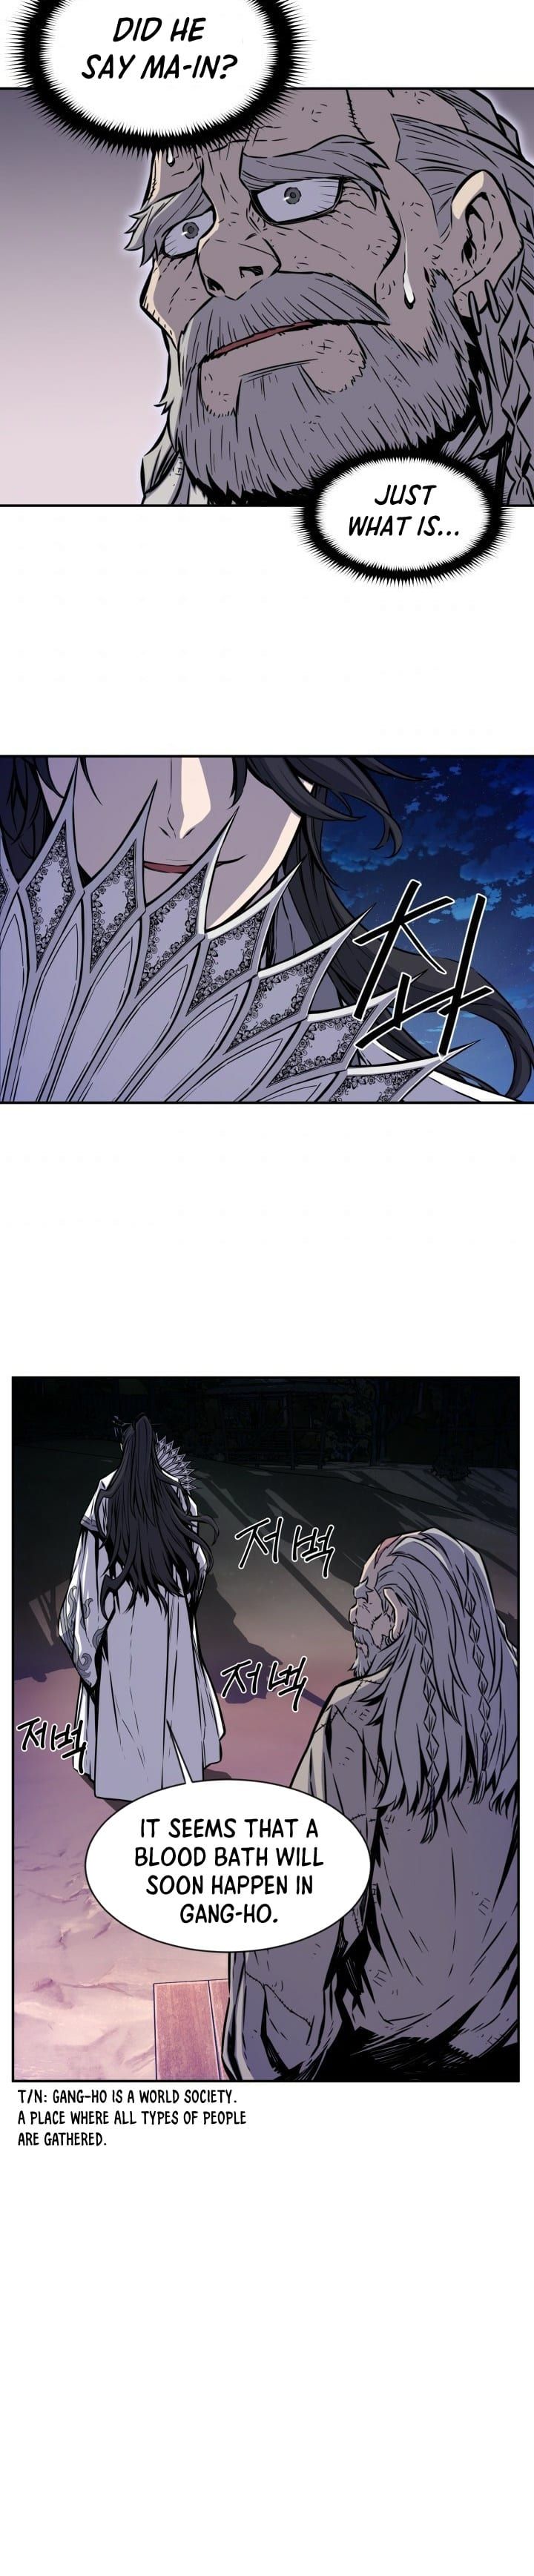 Legend of Mir: Gold Armored Sword Dragon Chapter 13 page 12